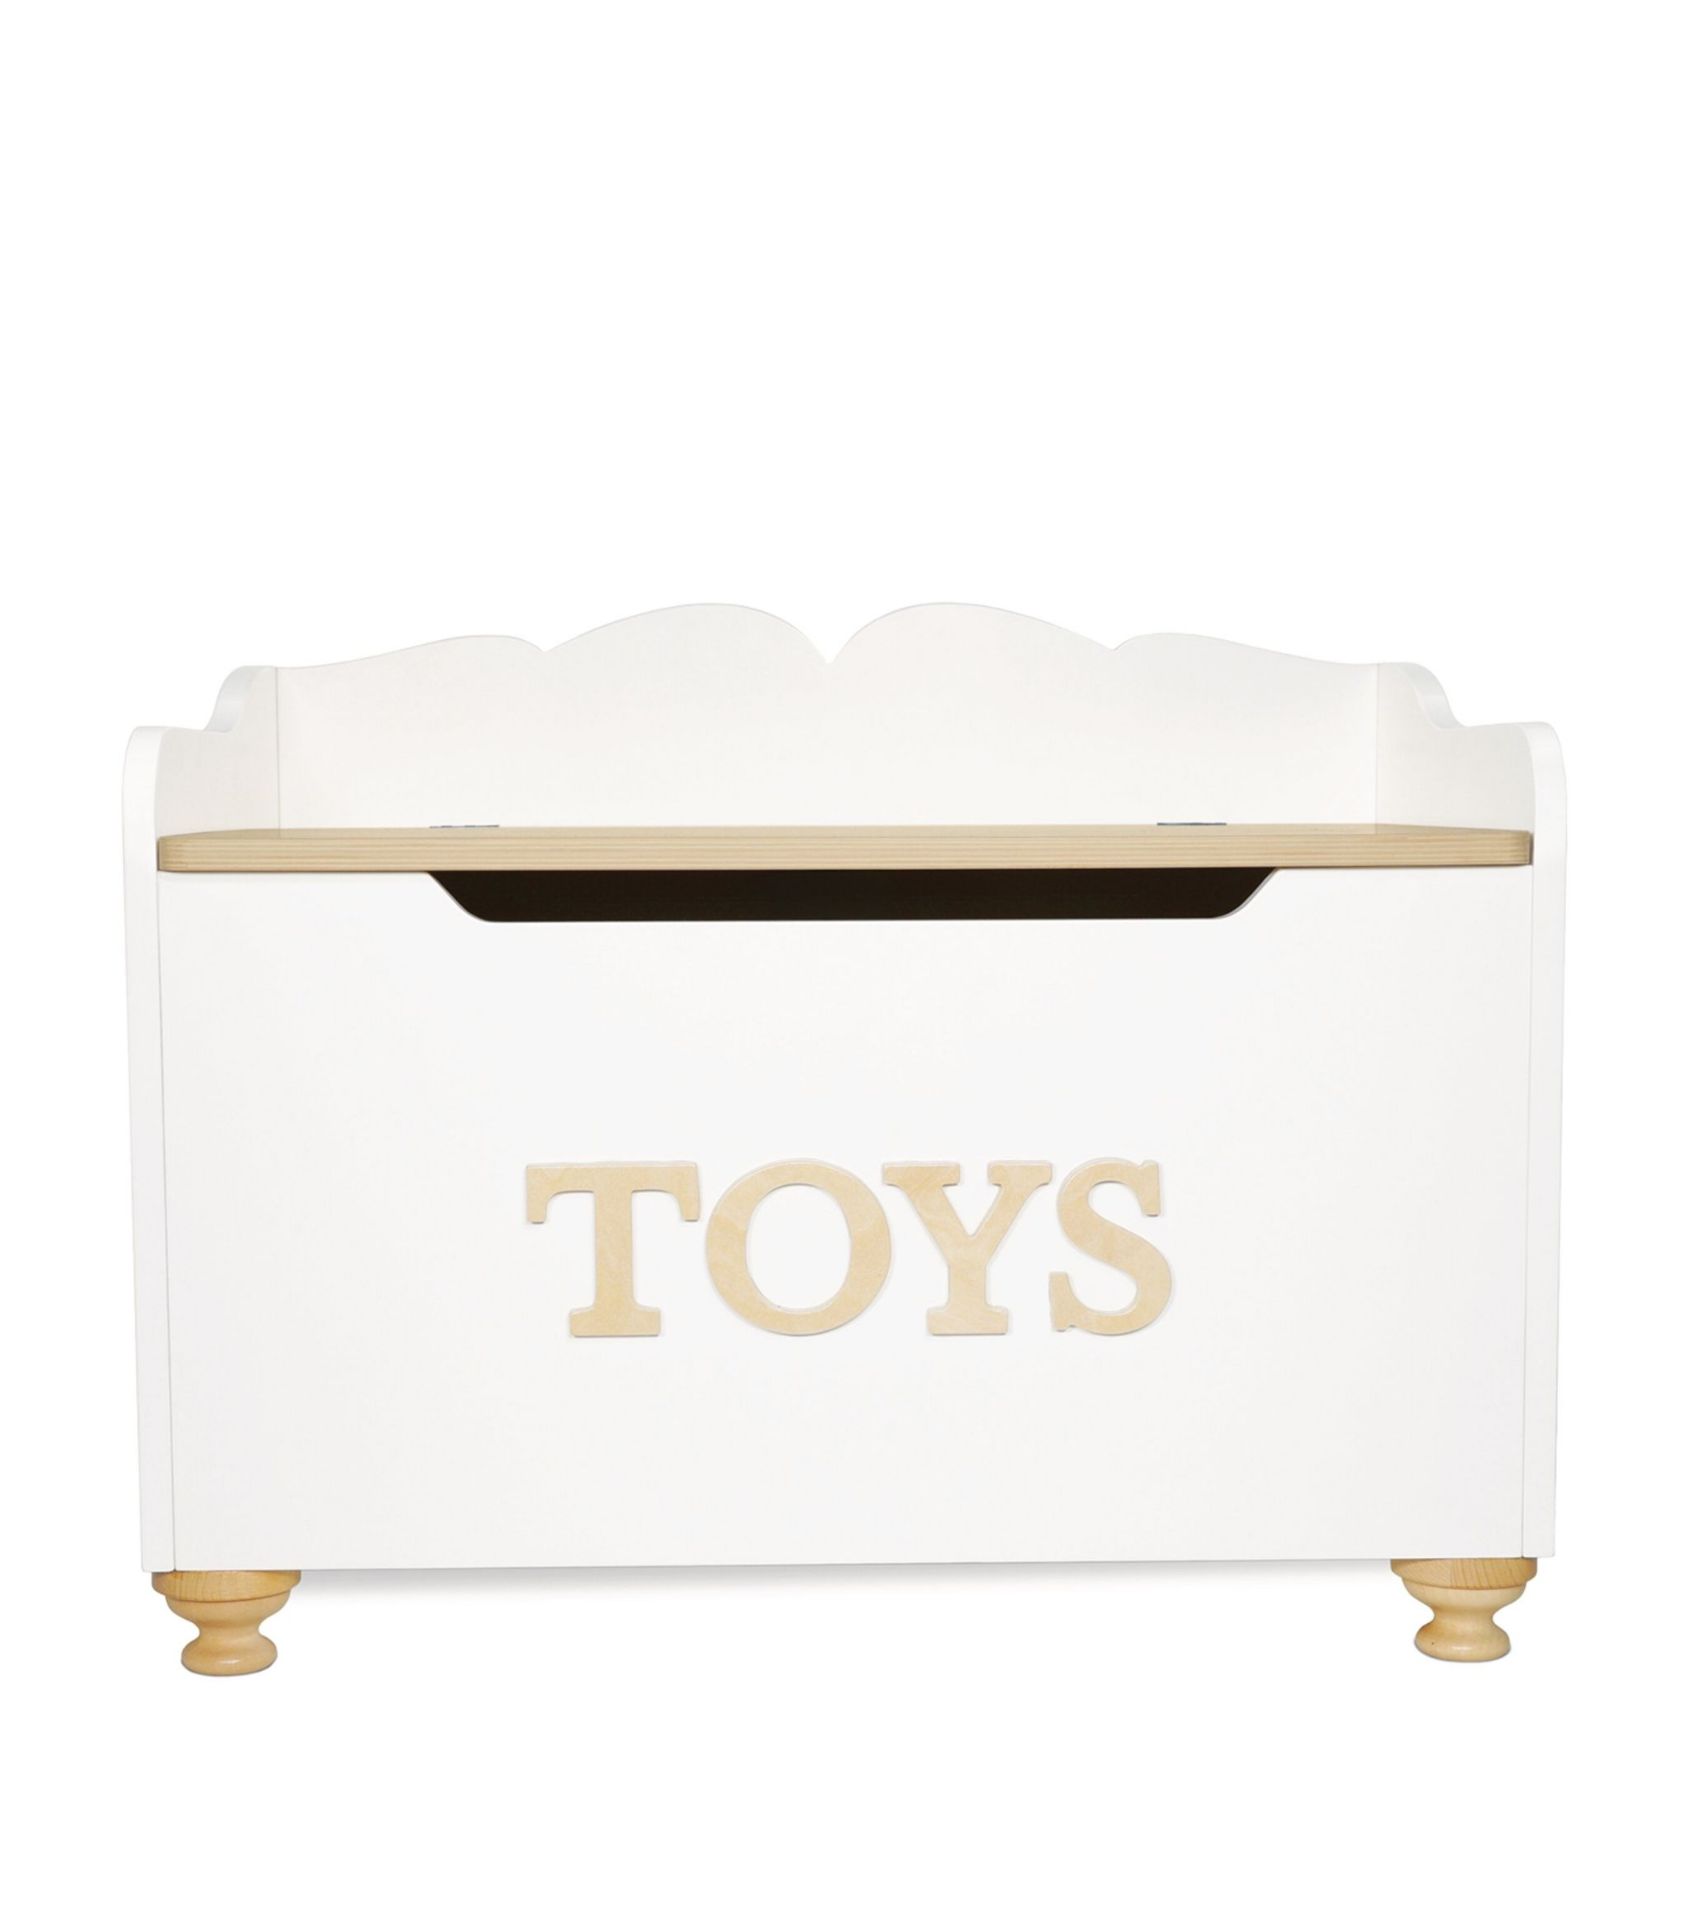 1 x LE TOY VAN Hand-Crafted Wooden Toy Storage Box - Boxed - HTYS176 - Location: Altrincham WA14